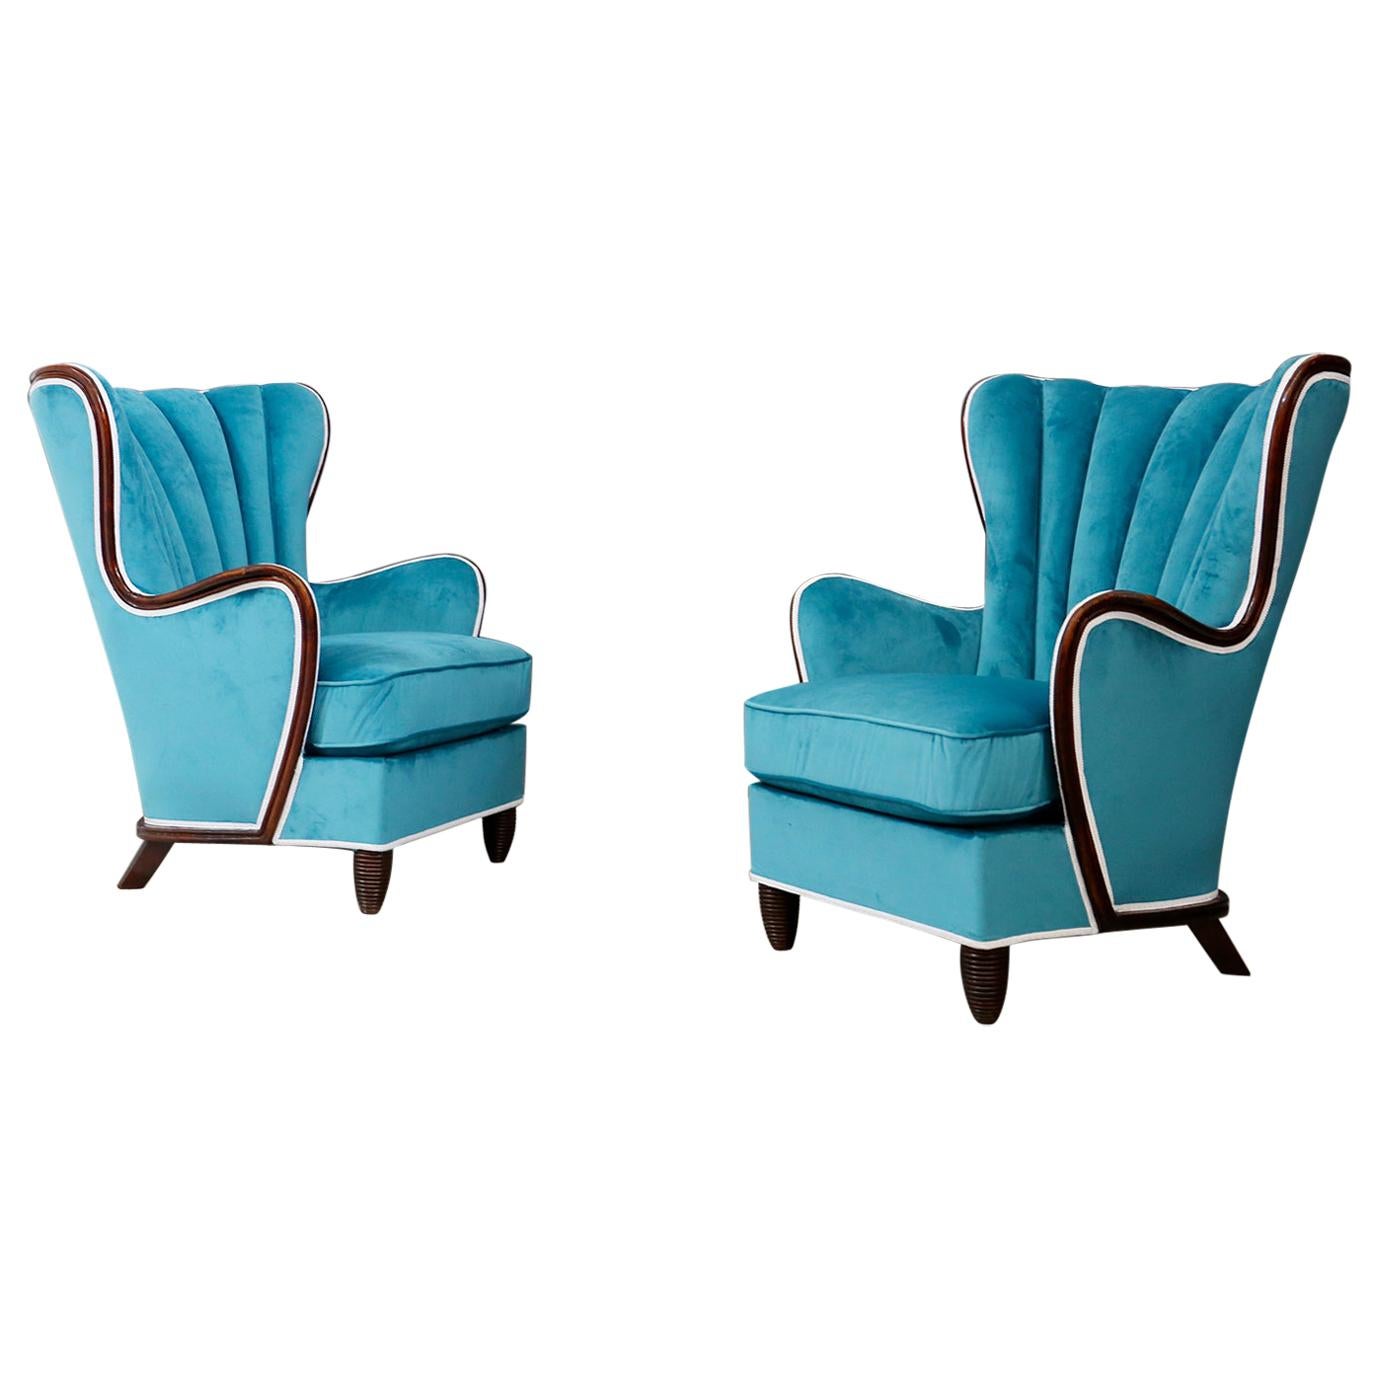 Pair of Midcentury Armchairs Blue Velvet Attributed to Paolo Buffa, 1950s